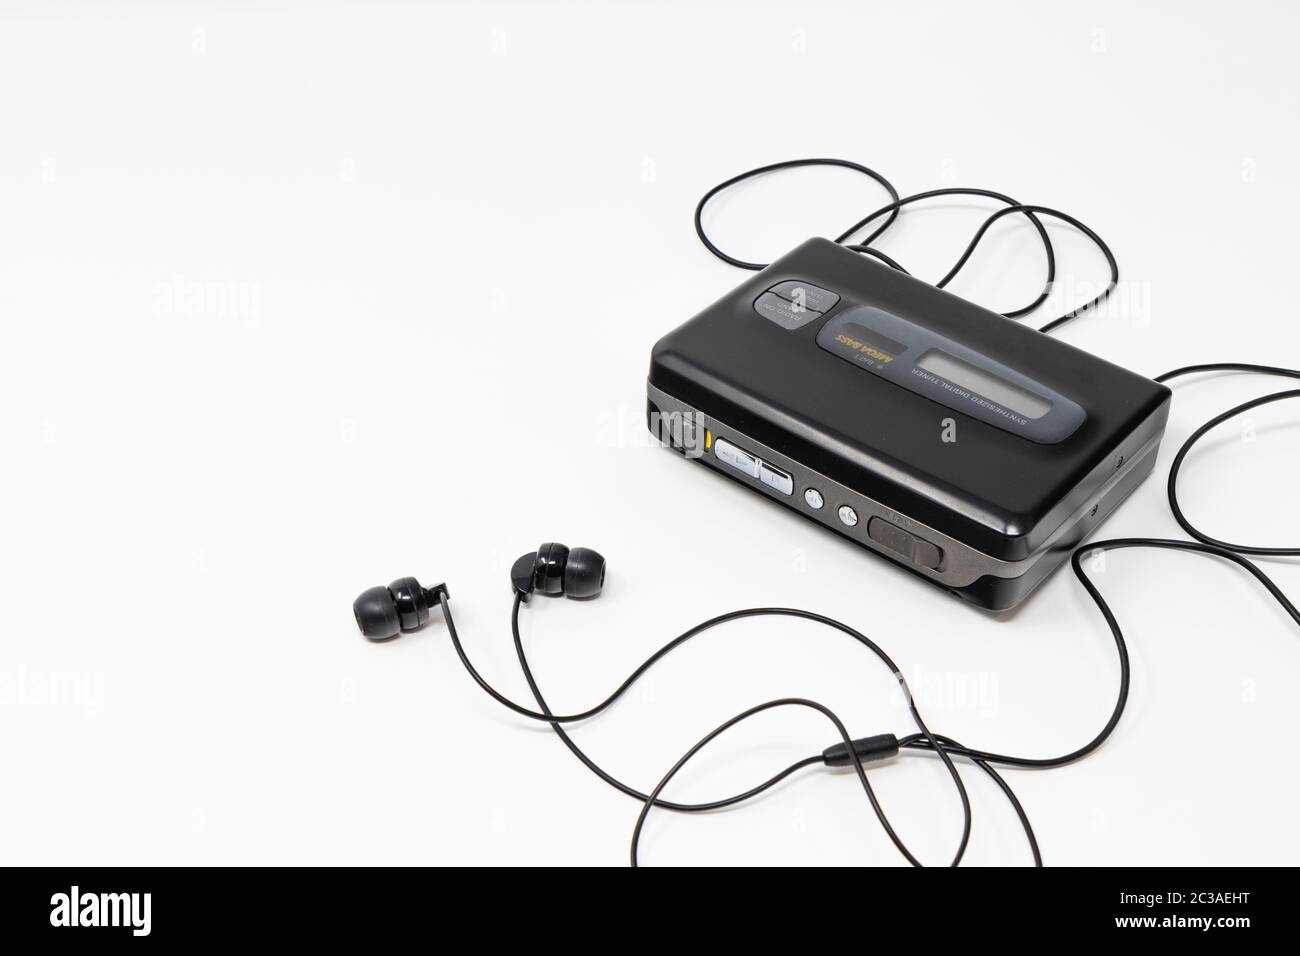 Vintage audio player. Old fashioned portable cassette player, cult object, icon and symbol of the 80s and 90s. Headphones isolated on white background Stock Photo